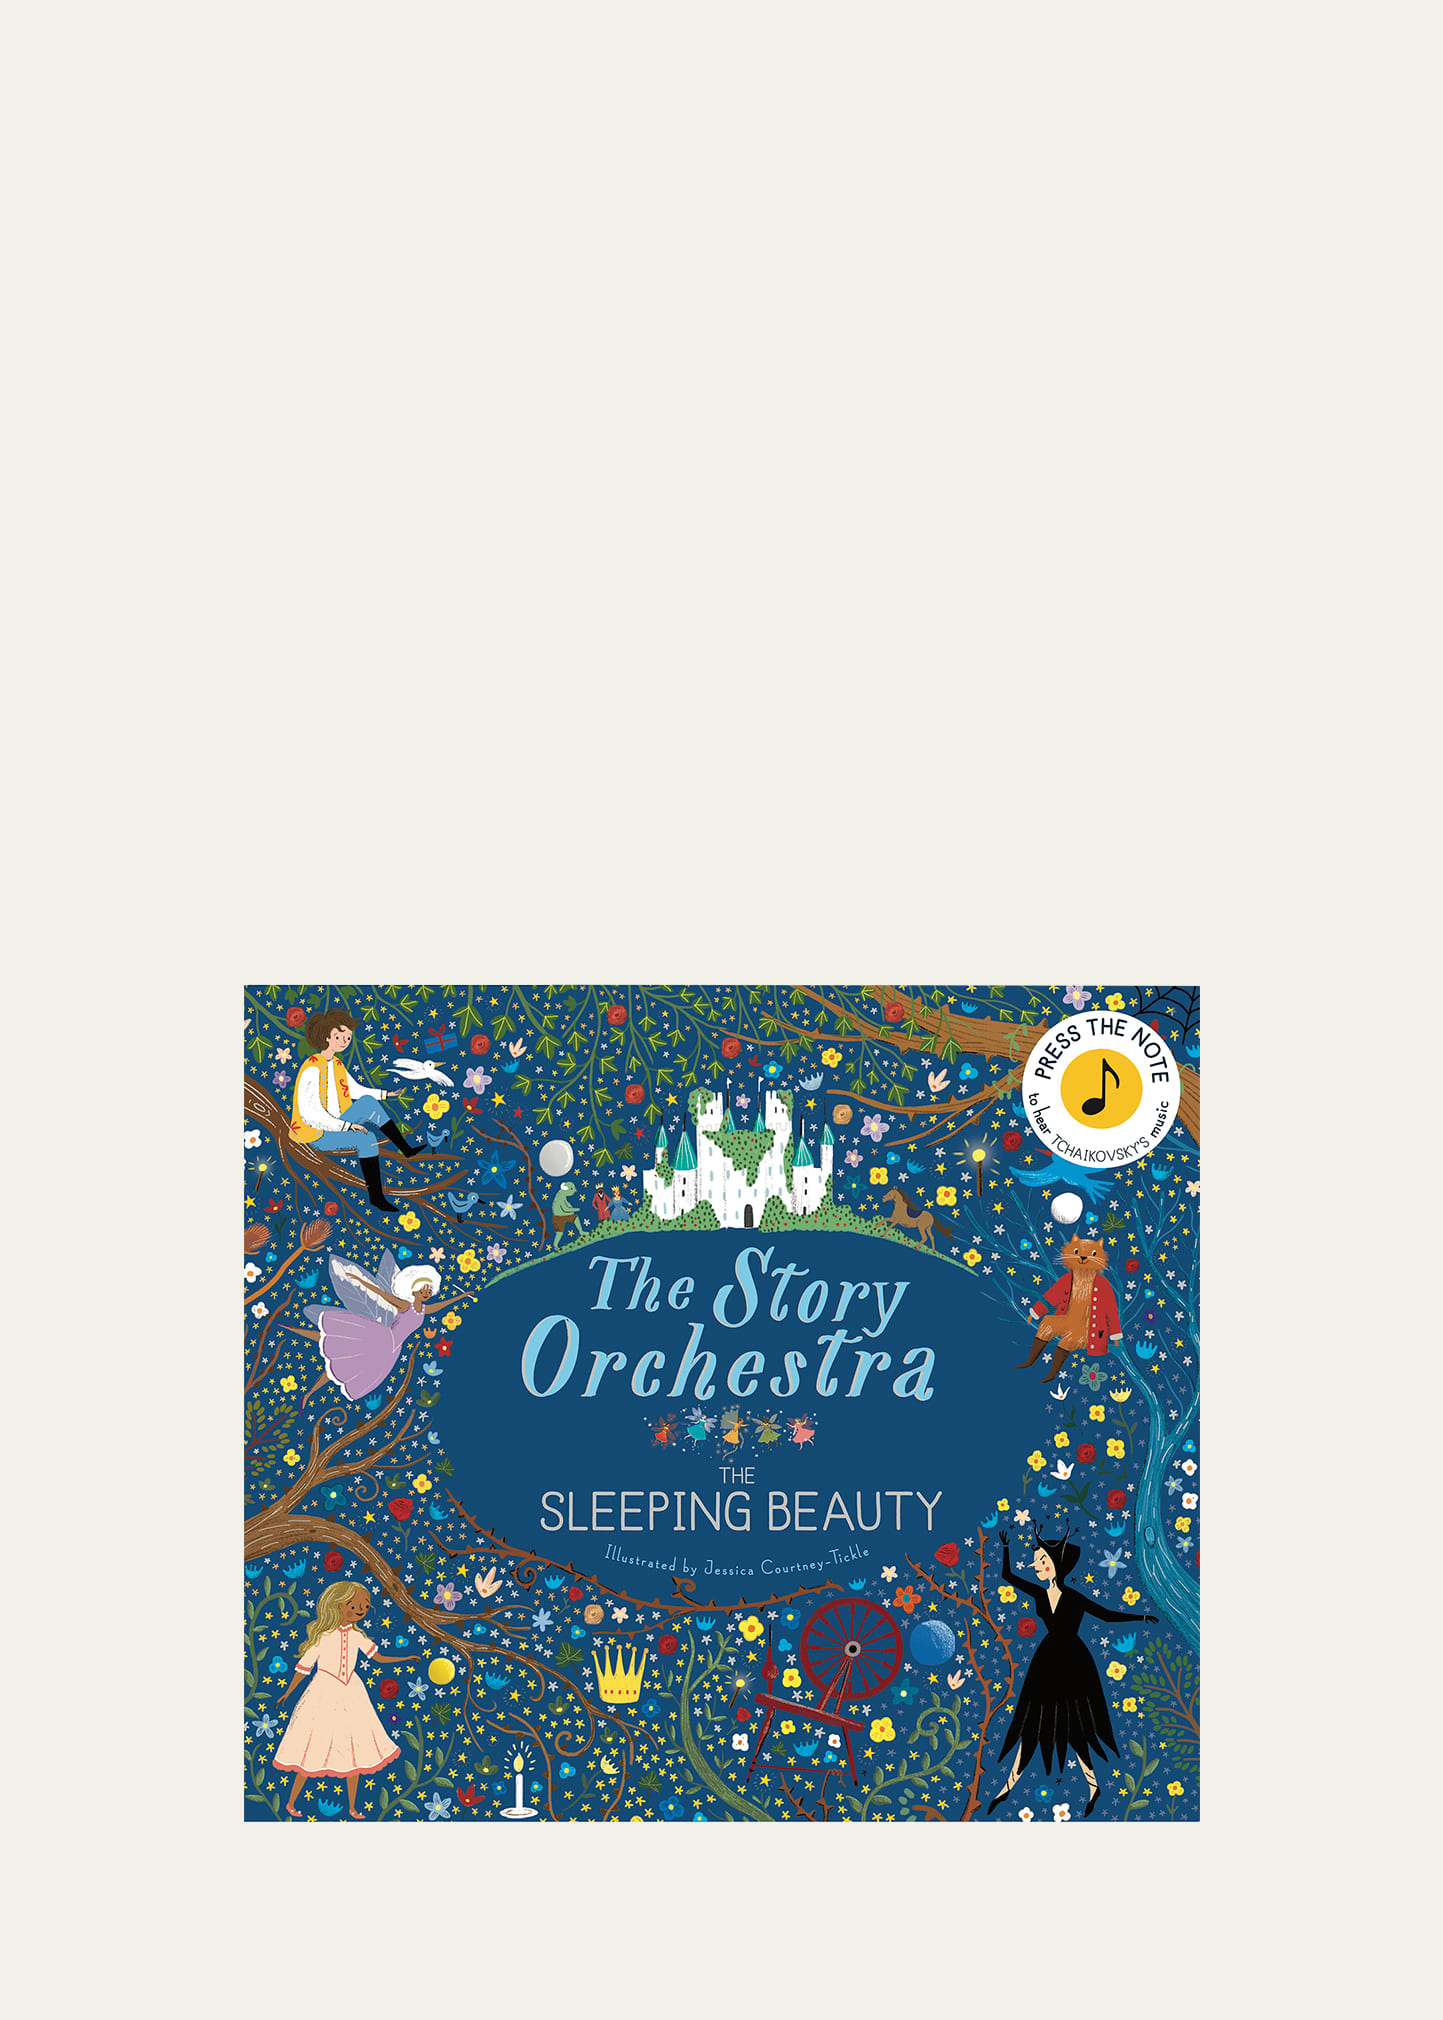 "The Story Orchestra: Sleeping Beauty" Book by Jessica Courtney Tickle